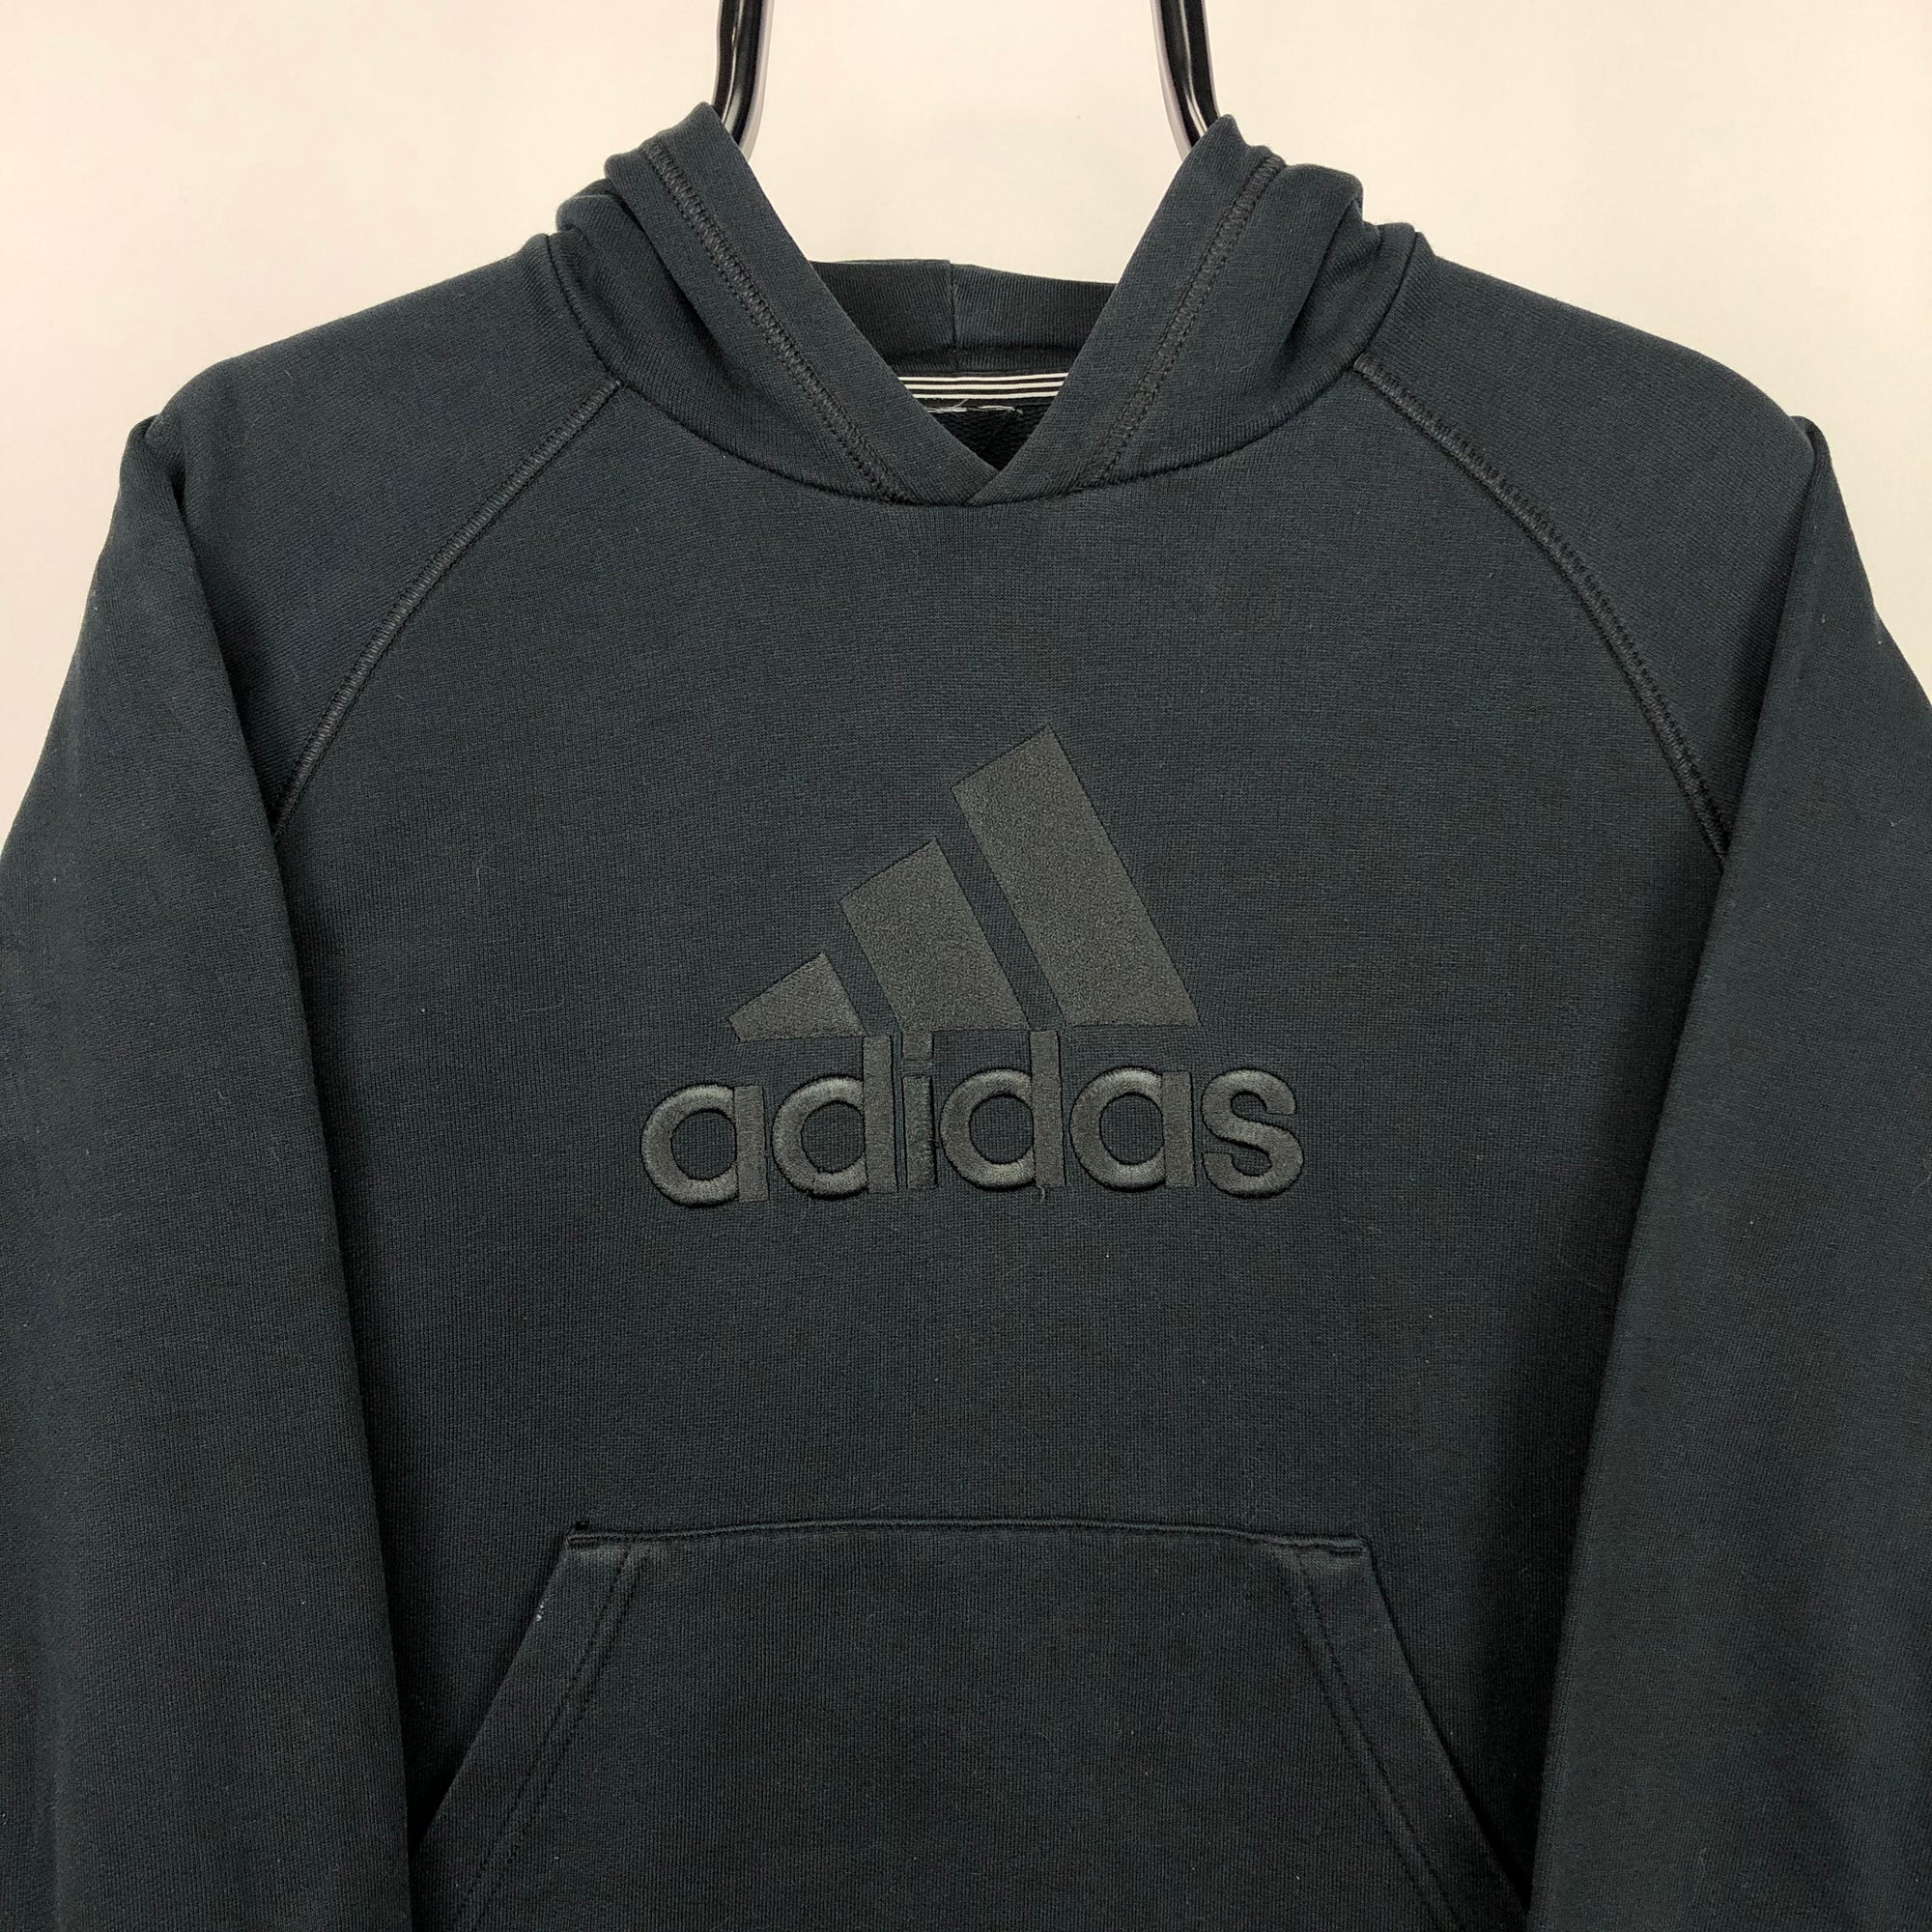 Vintage Adidas Spellout Hoodie in Black - Men's XS/Women's Small